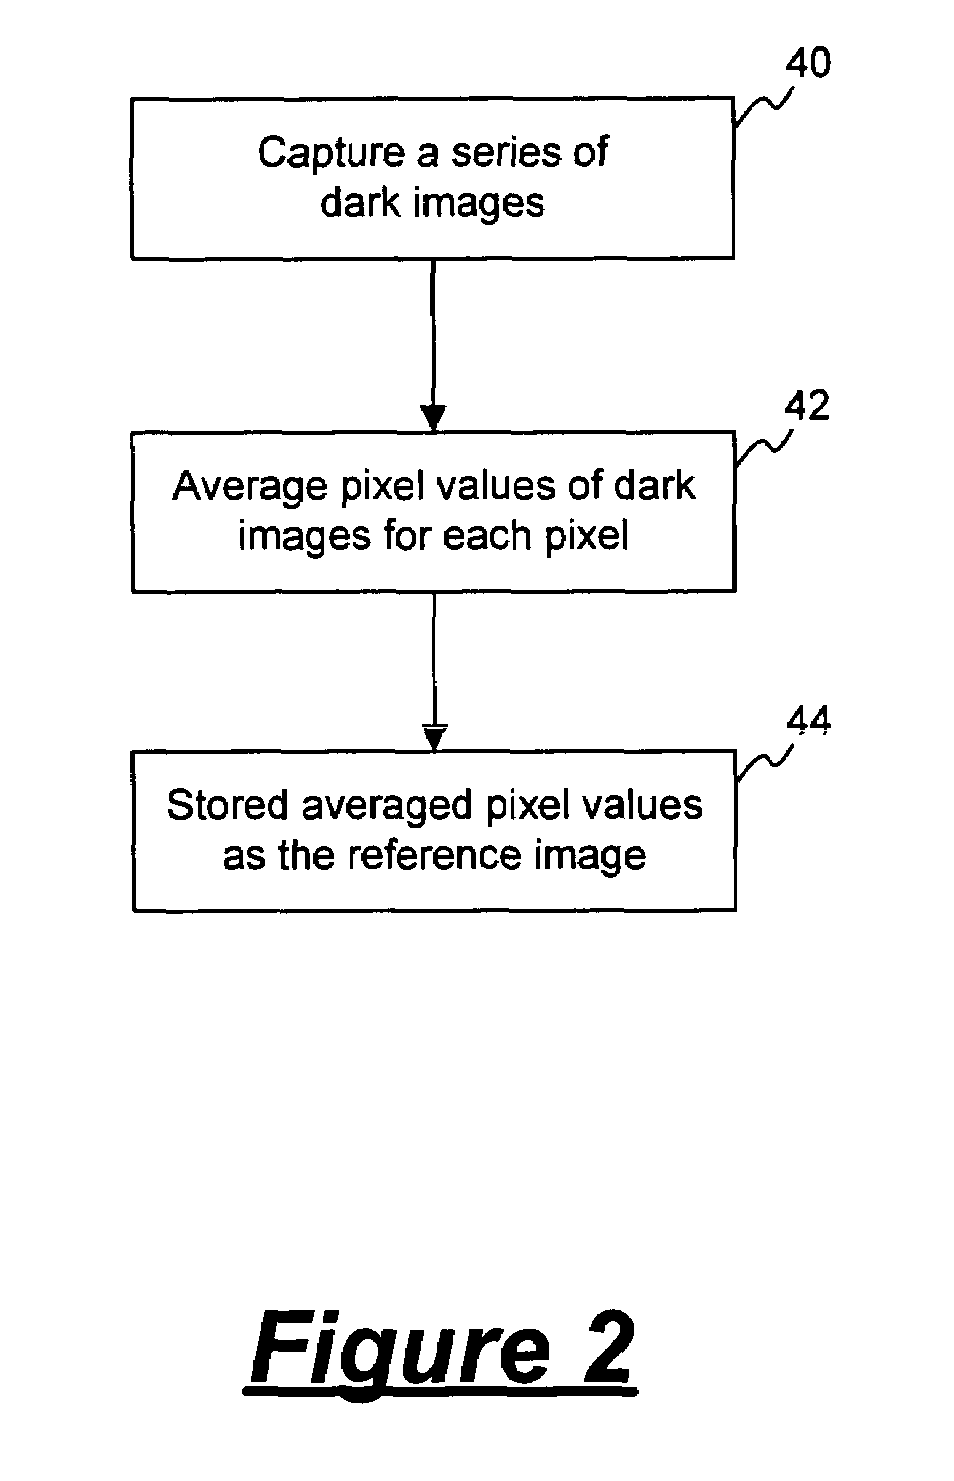 Fixed pattern noise subtraction in a digital image sensor